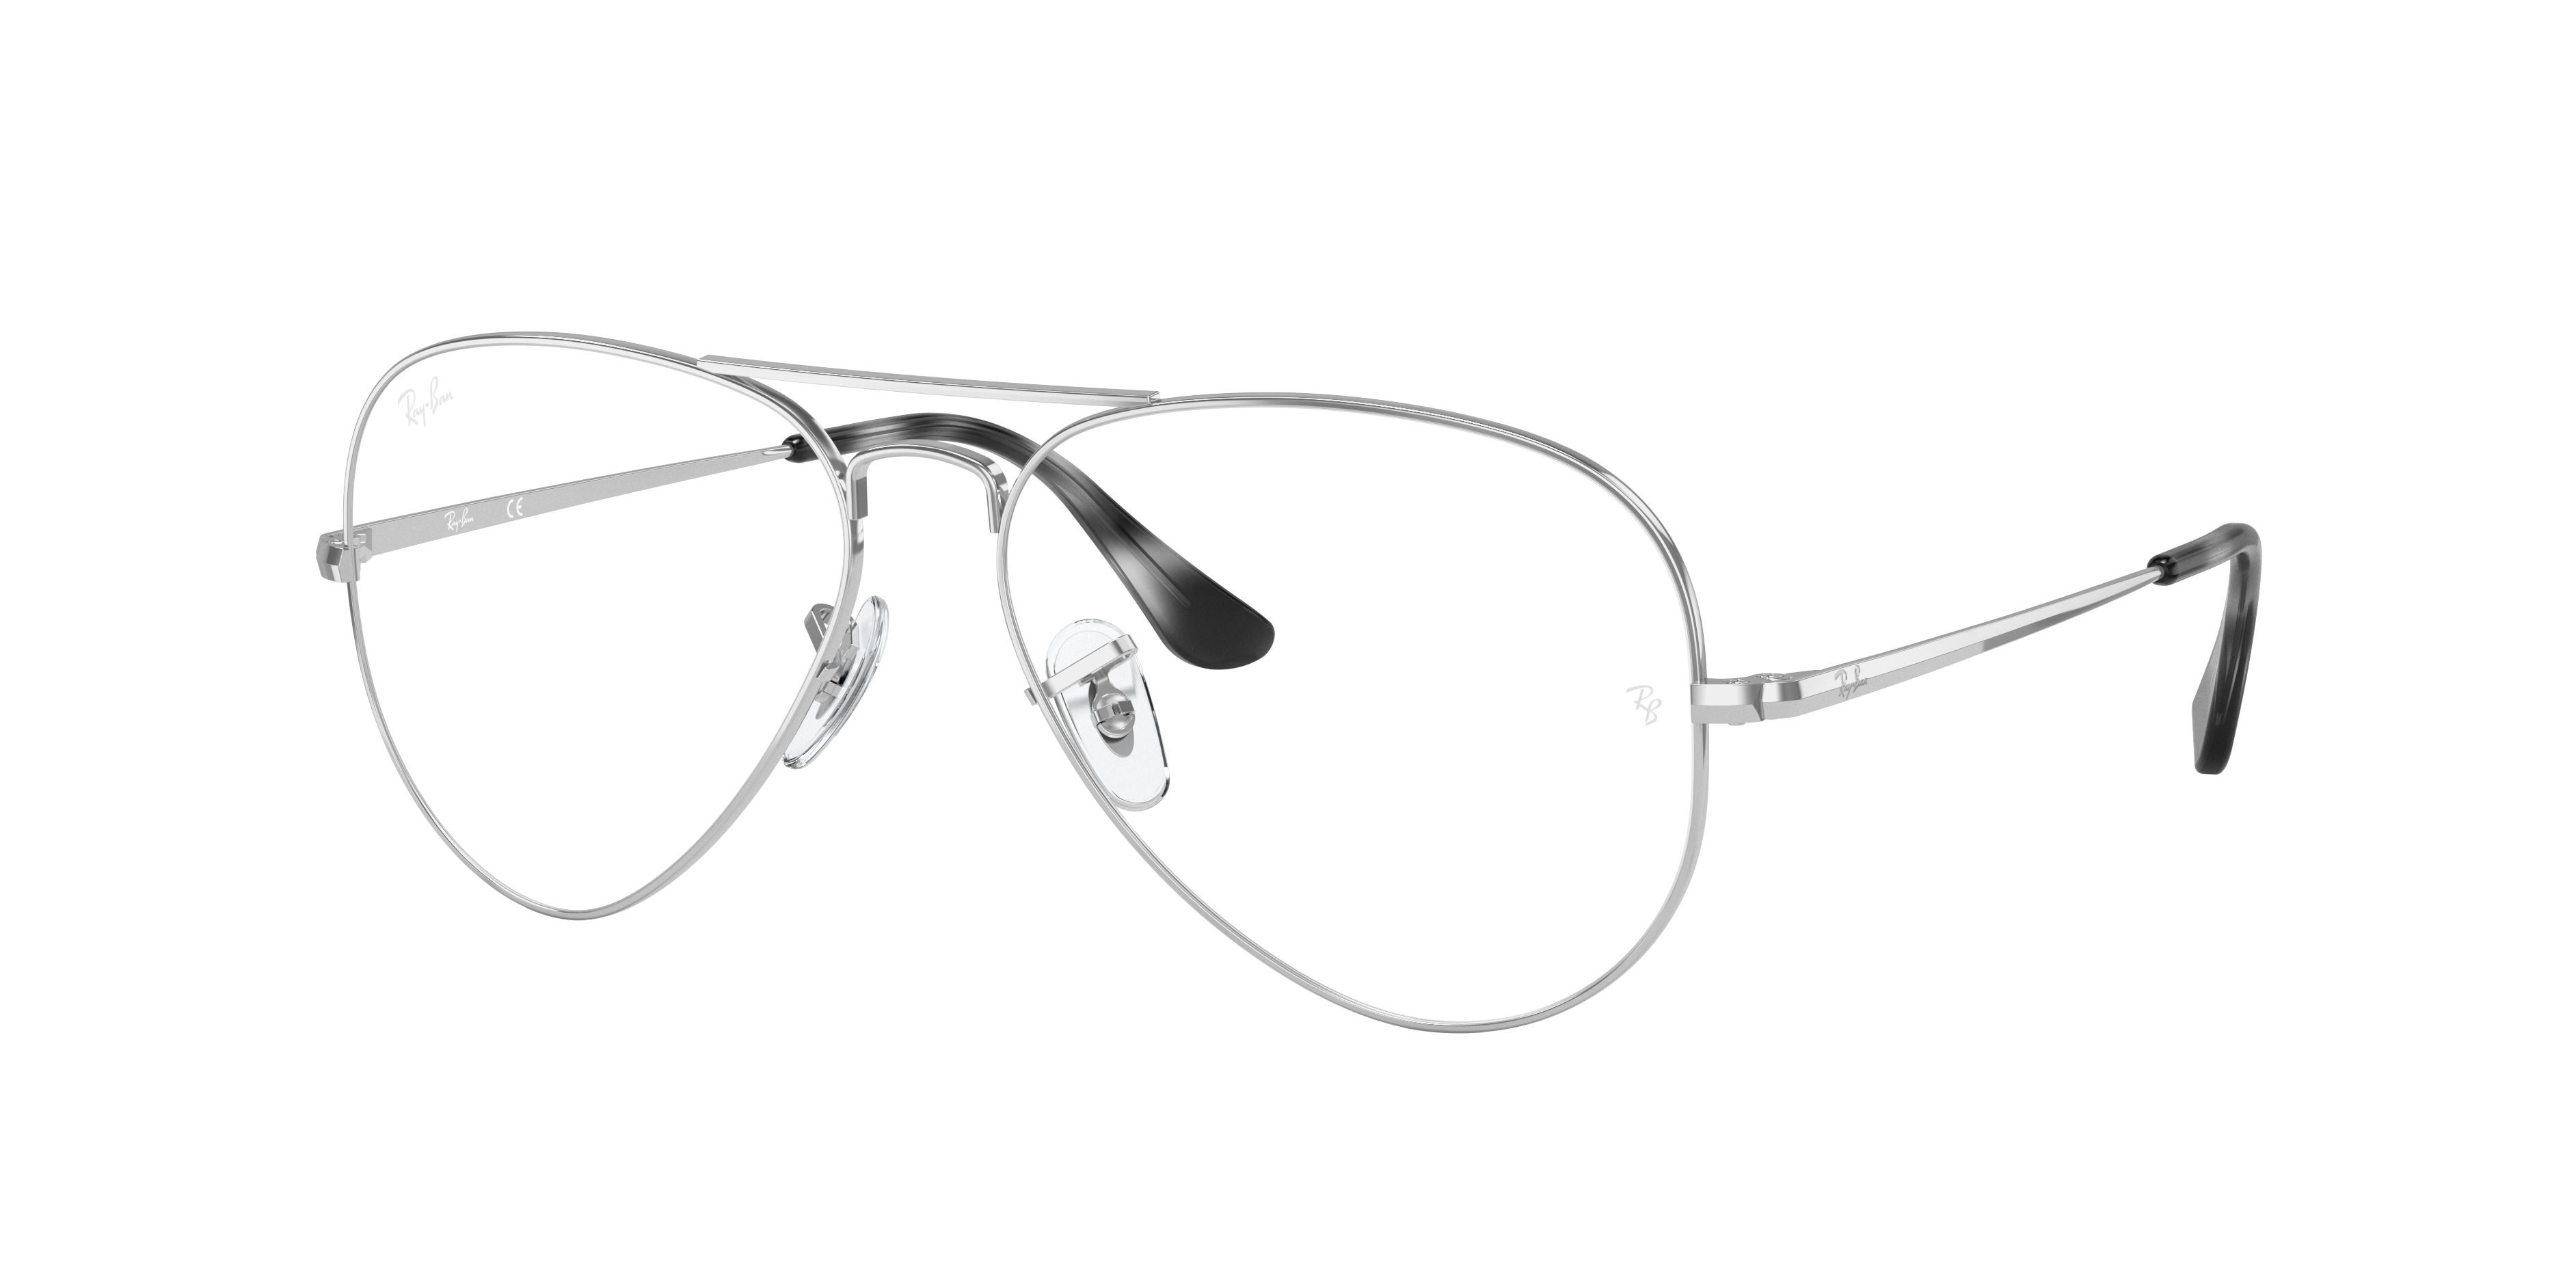 lenscrafters raybans